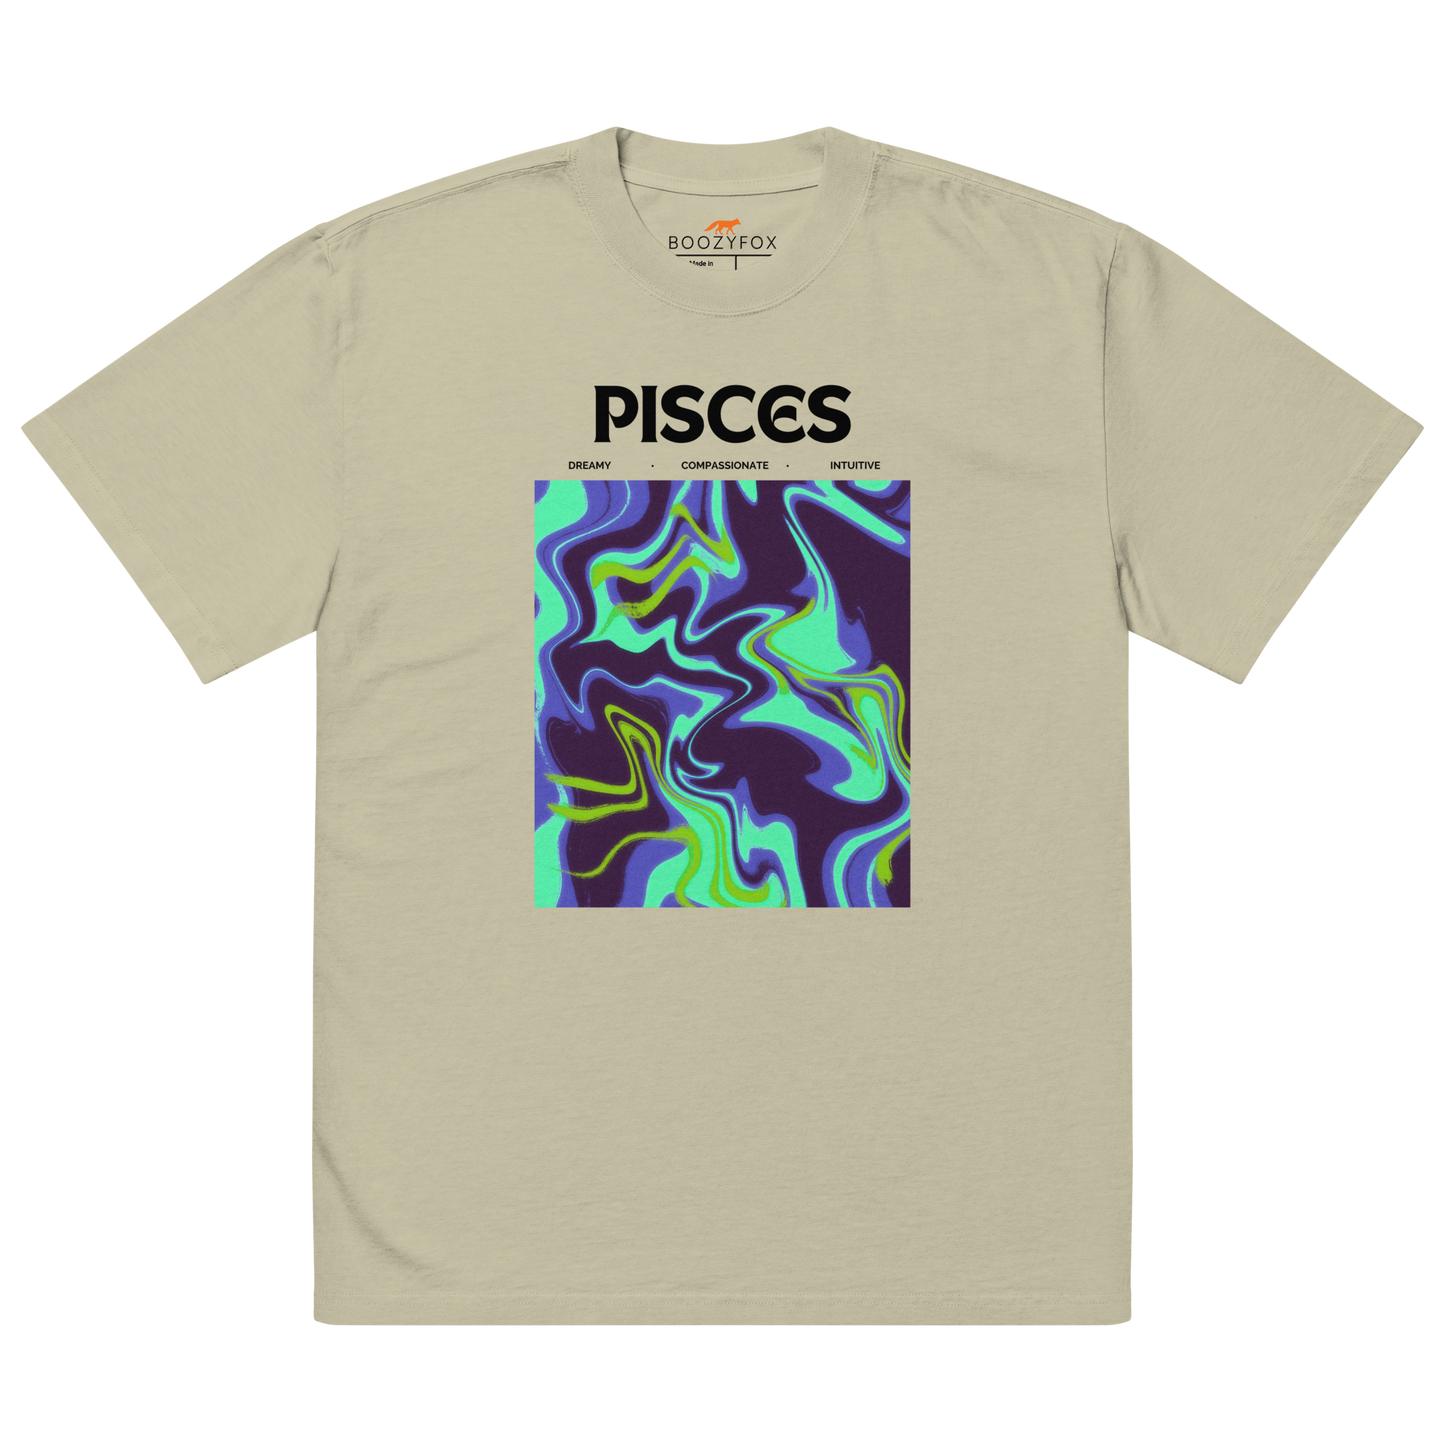 Faded Eucalyptus Pisces Oversized T-Shirt featuring an Abstract Pisces Star Sign graphic on the chest - Cool Graphic Zodiac Oversized Tees - Boozy Fox